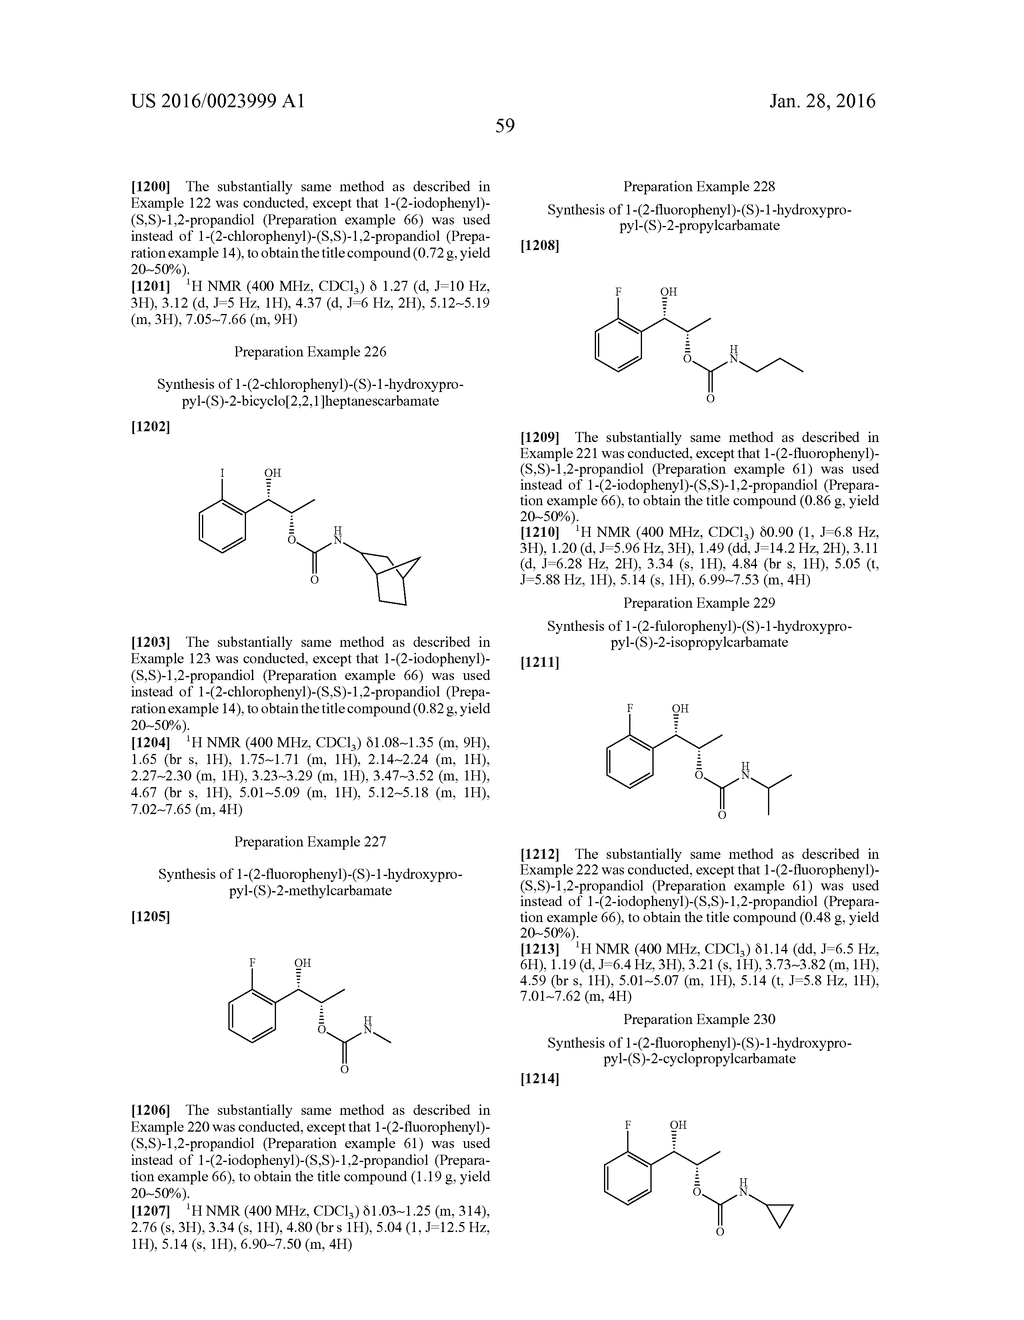 PHENYL ALKYL CARBAMATE COMPOUNDS FOR USE IN PREVENTING OR TREATING     EPILEPSY OR EPILEPSY-RELATED SYNDROME - diagram, schematic, and image 60